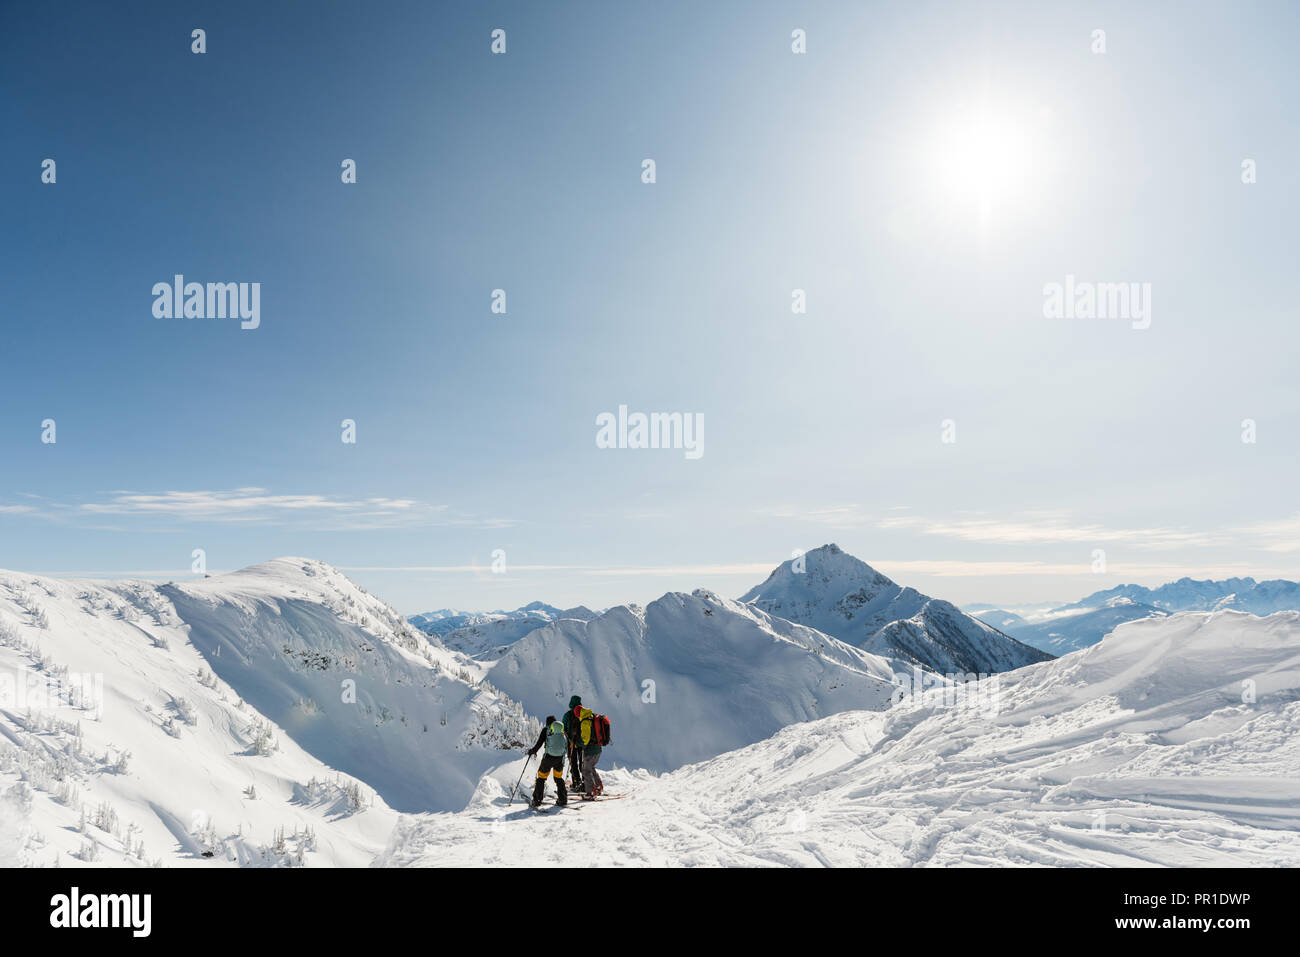 Group of skiers walking on a snowy mountain Stock Photo